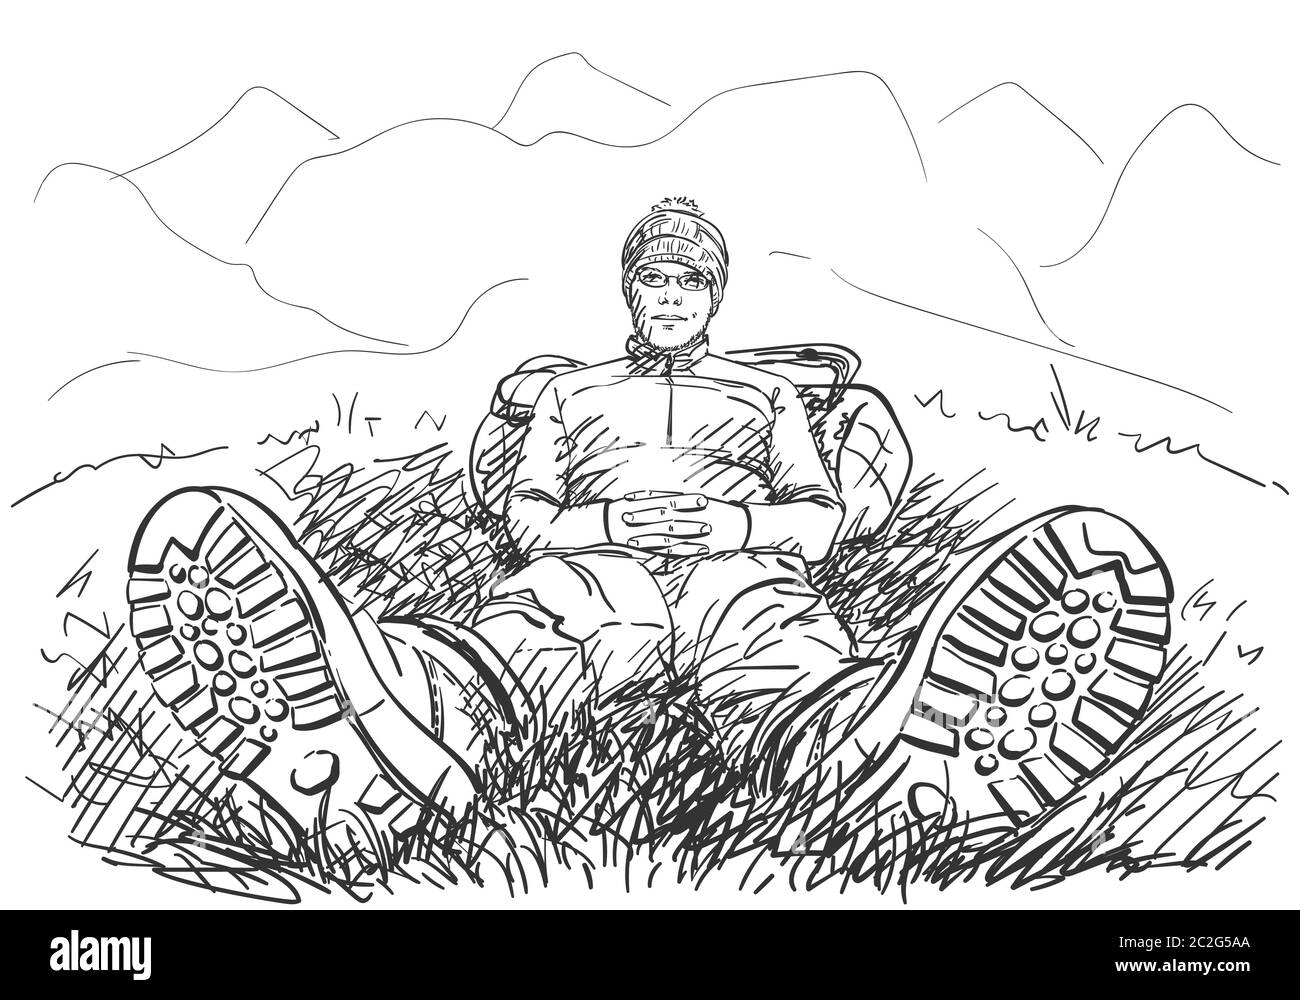 Perspective drawing of hiker man sitting on ground, with legs in trekking boots, stretched forward, and with back rested on backpack, in mountains env Stock Vector